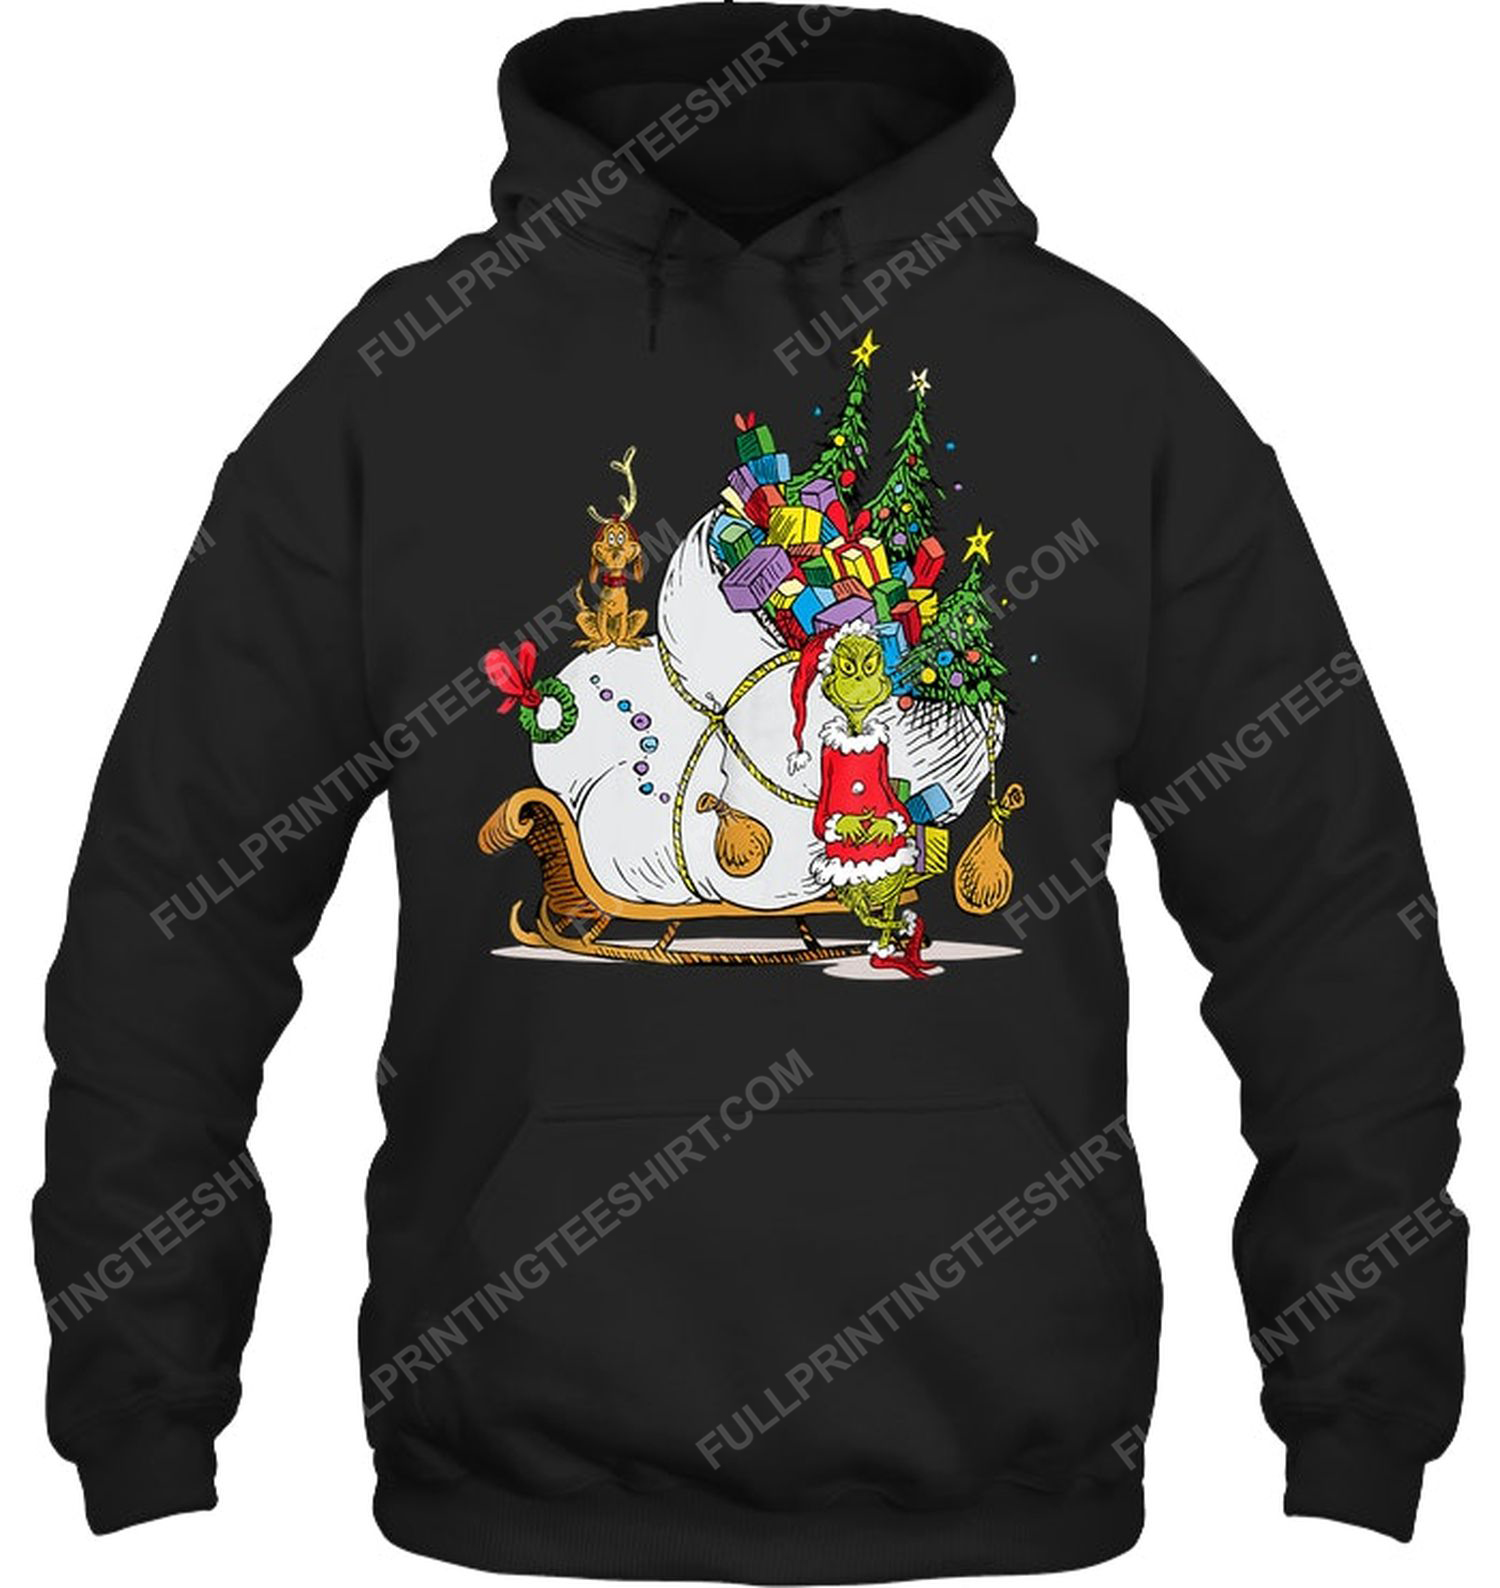 The grinch and christmas gifts hoodie